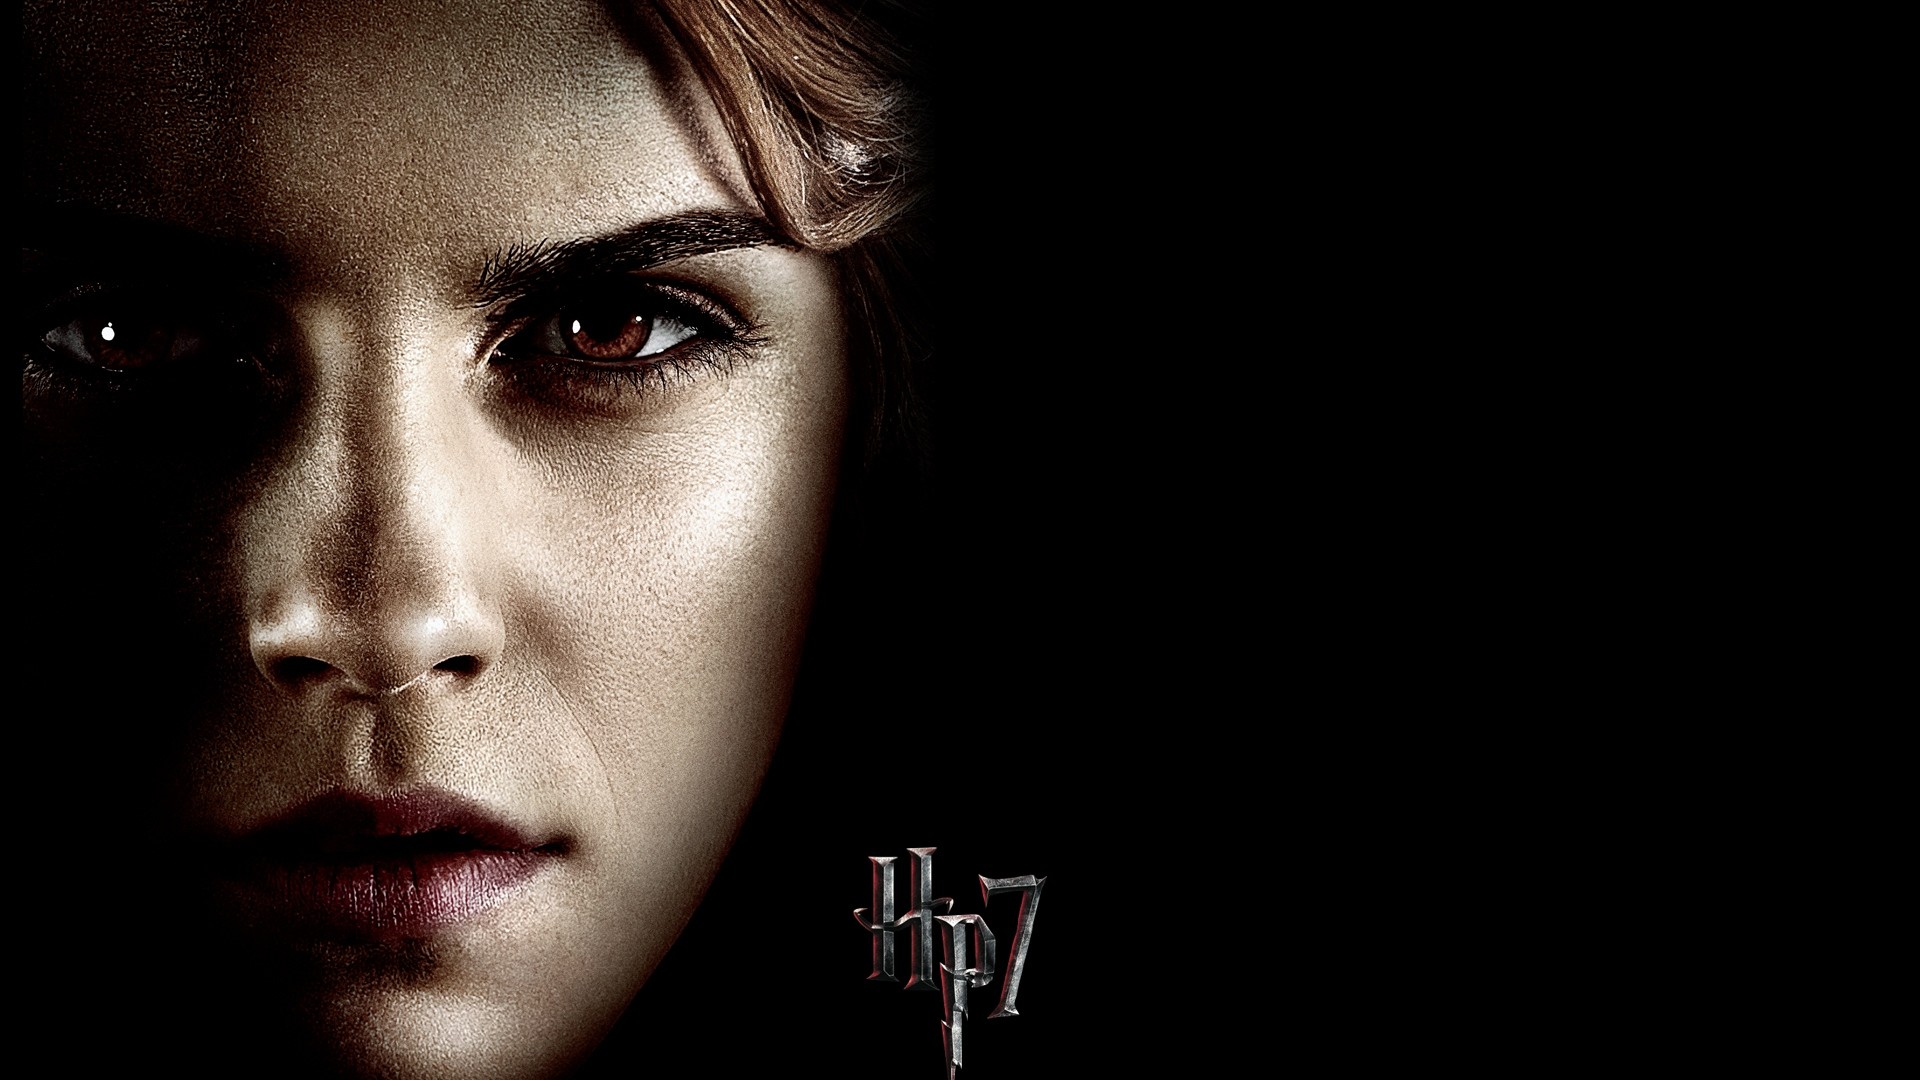 Wallpaper harry potter and the deathly hallows, hermione granger, emma watson